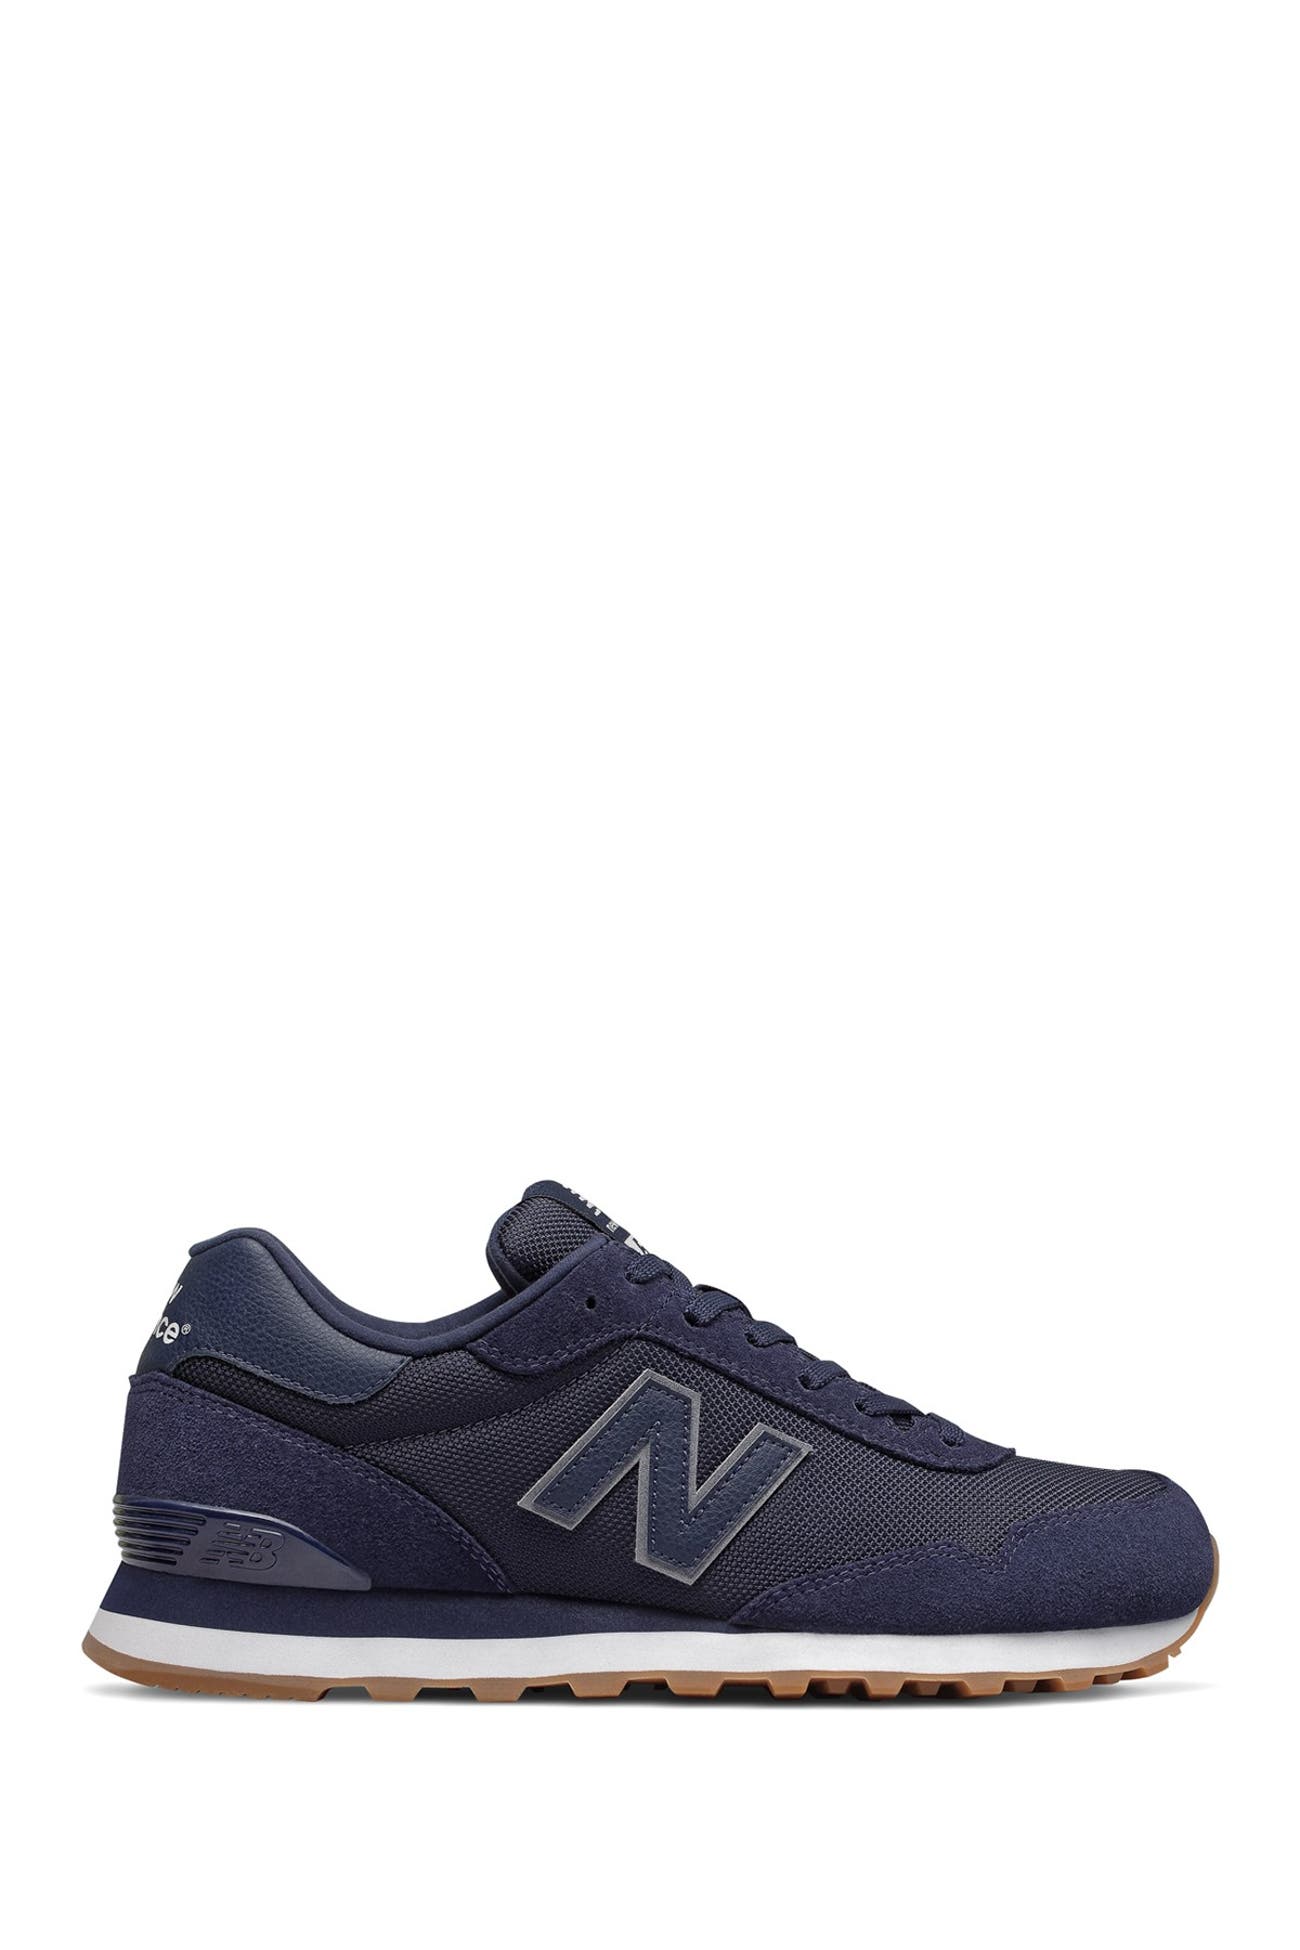 New Balance | Lace-Up Classic Sneaker | Nordstrom Rack